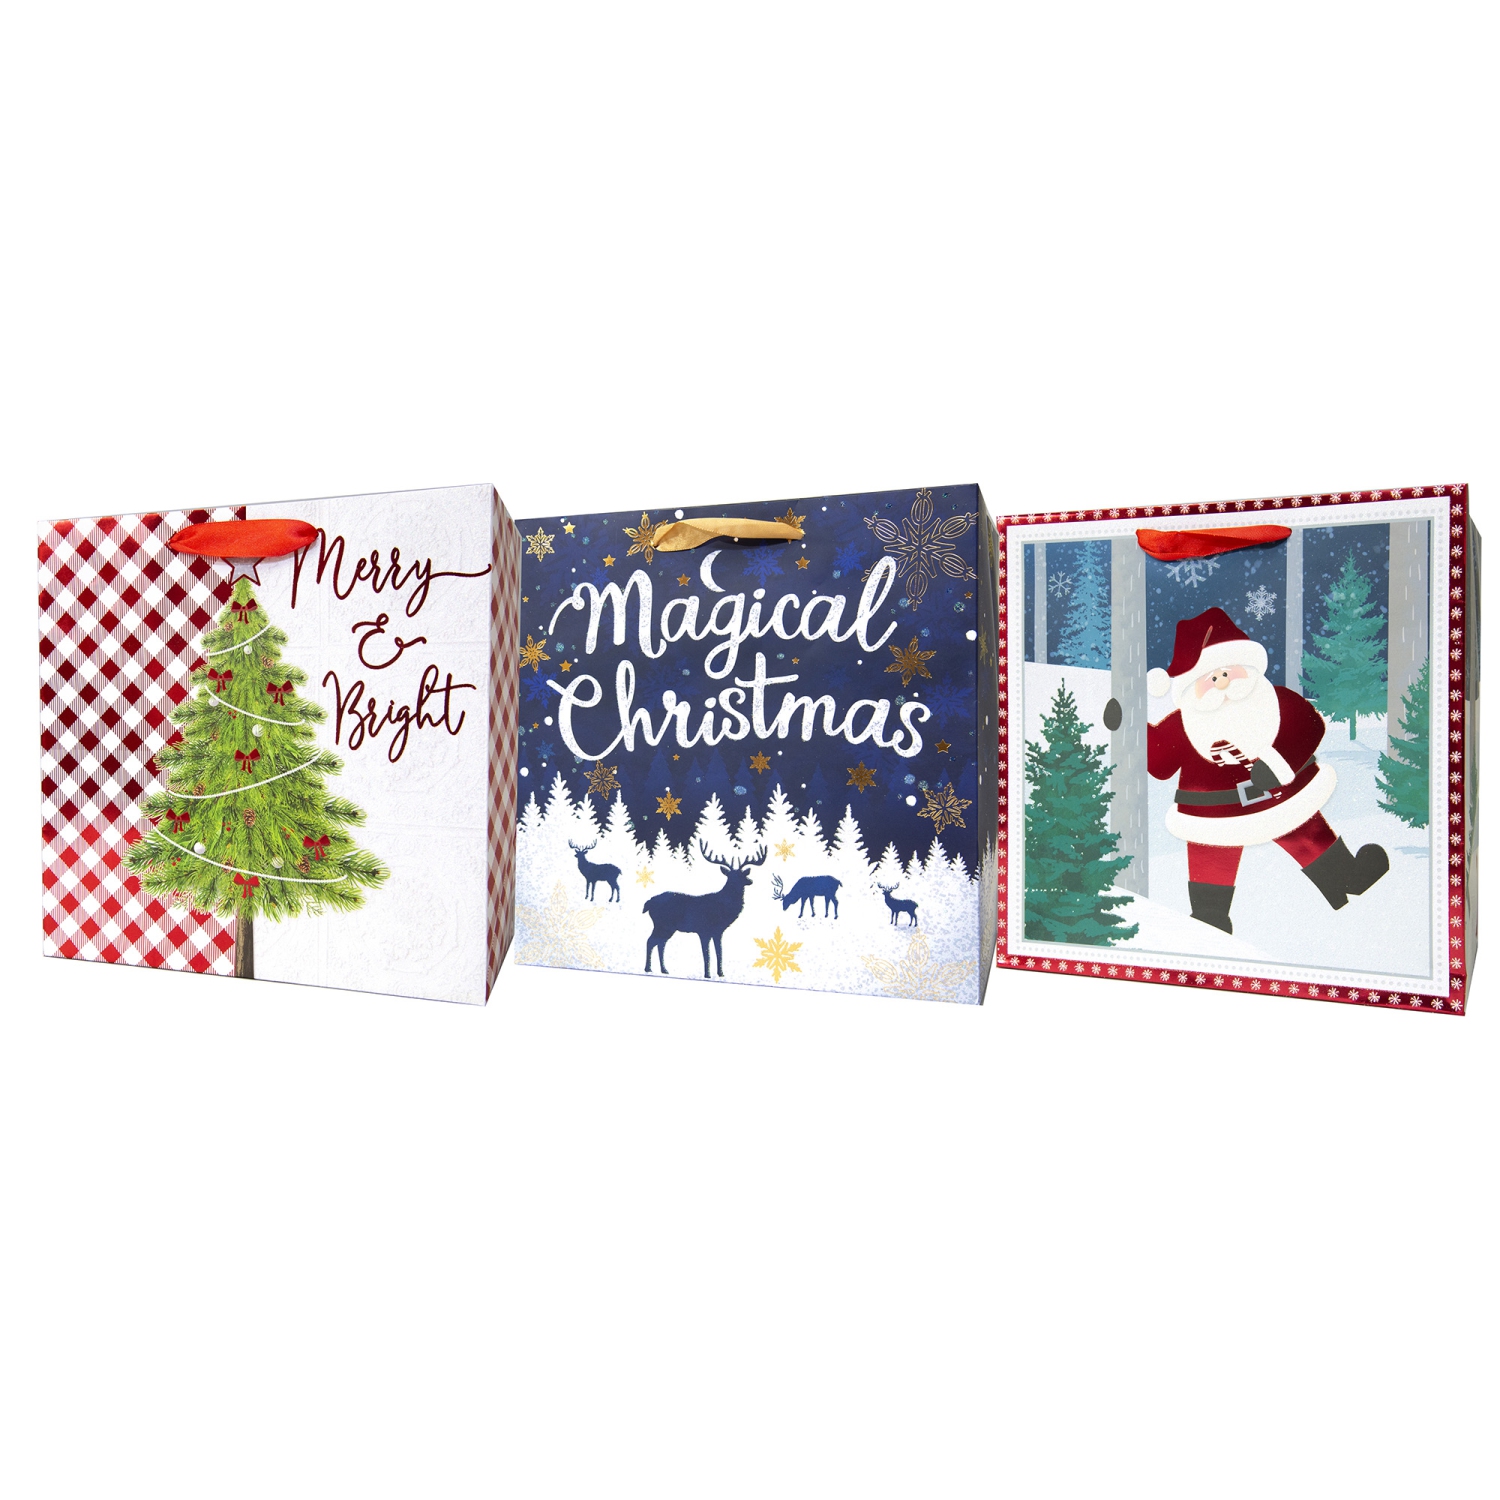 Pack of 3 Assorted Medium Christmas Gift Bags with Handle